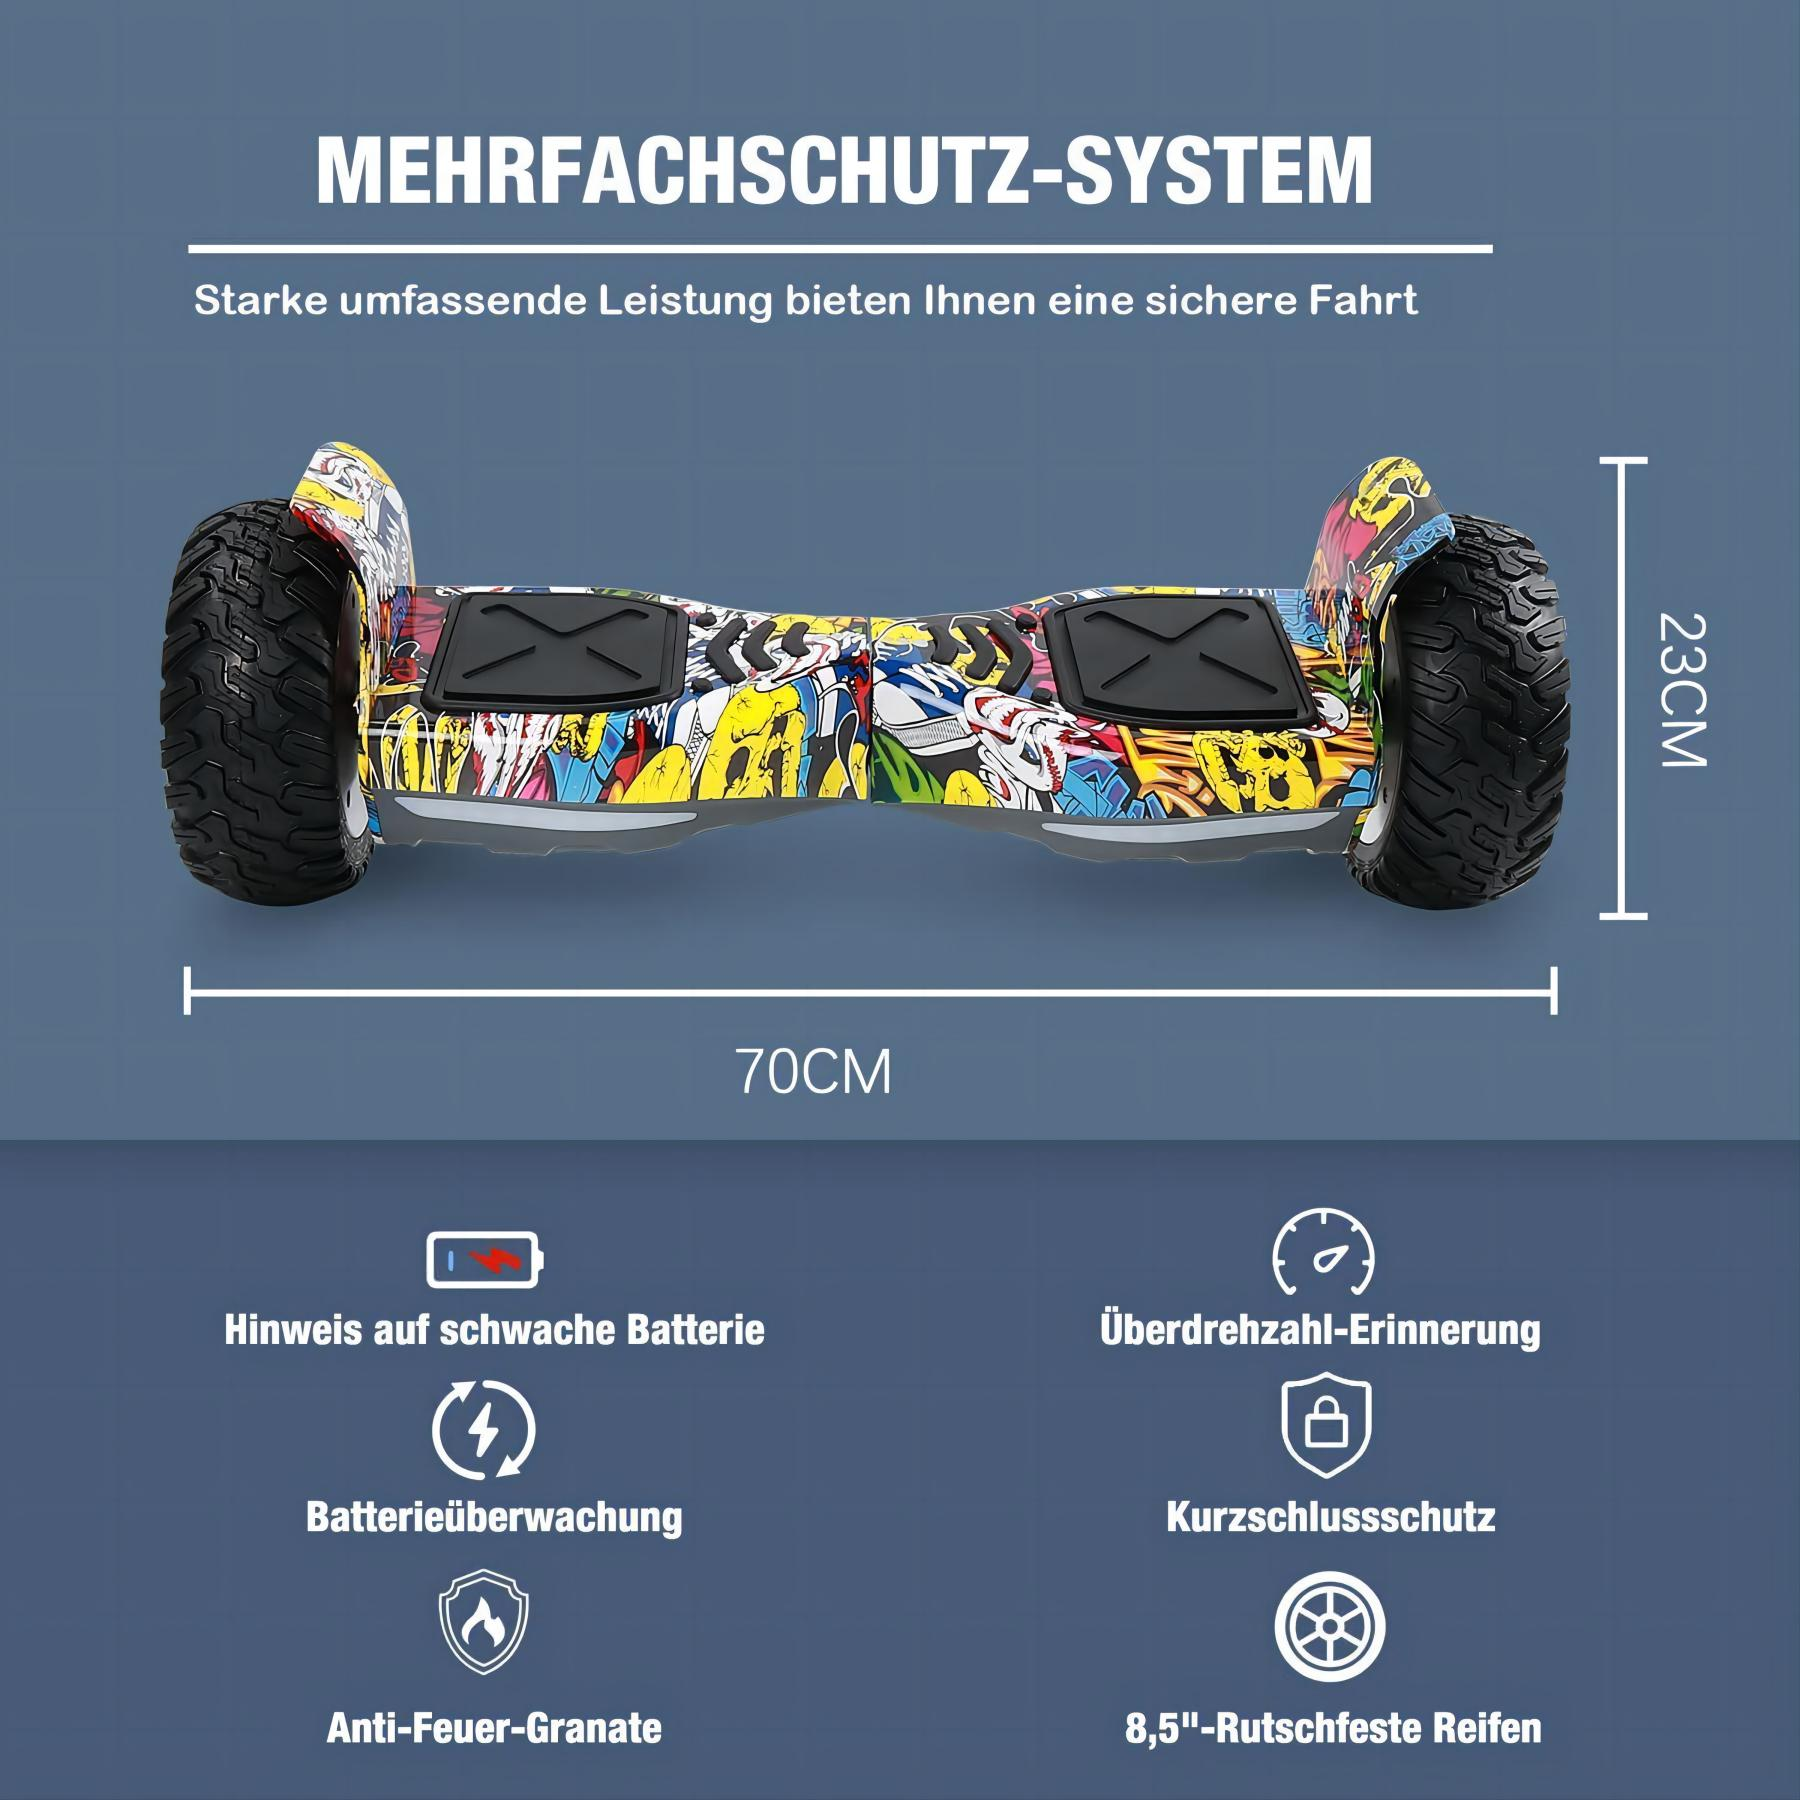 Balance RCB Hippop) (8,5 Sitz mit HM2 Board Hoverboard Zoll,